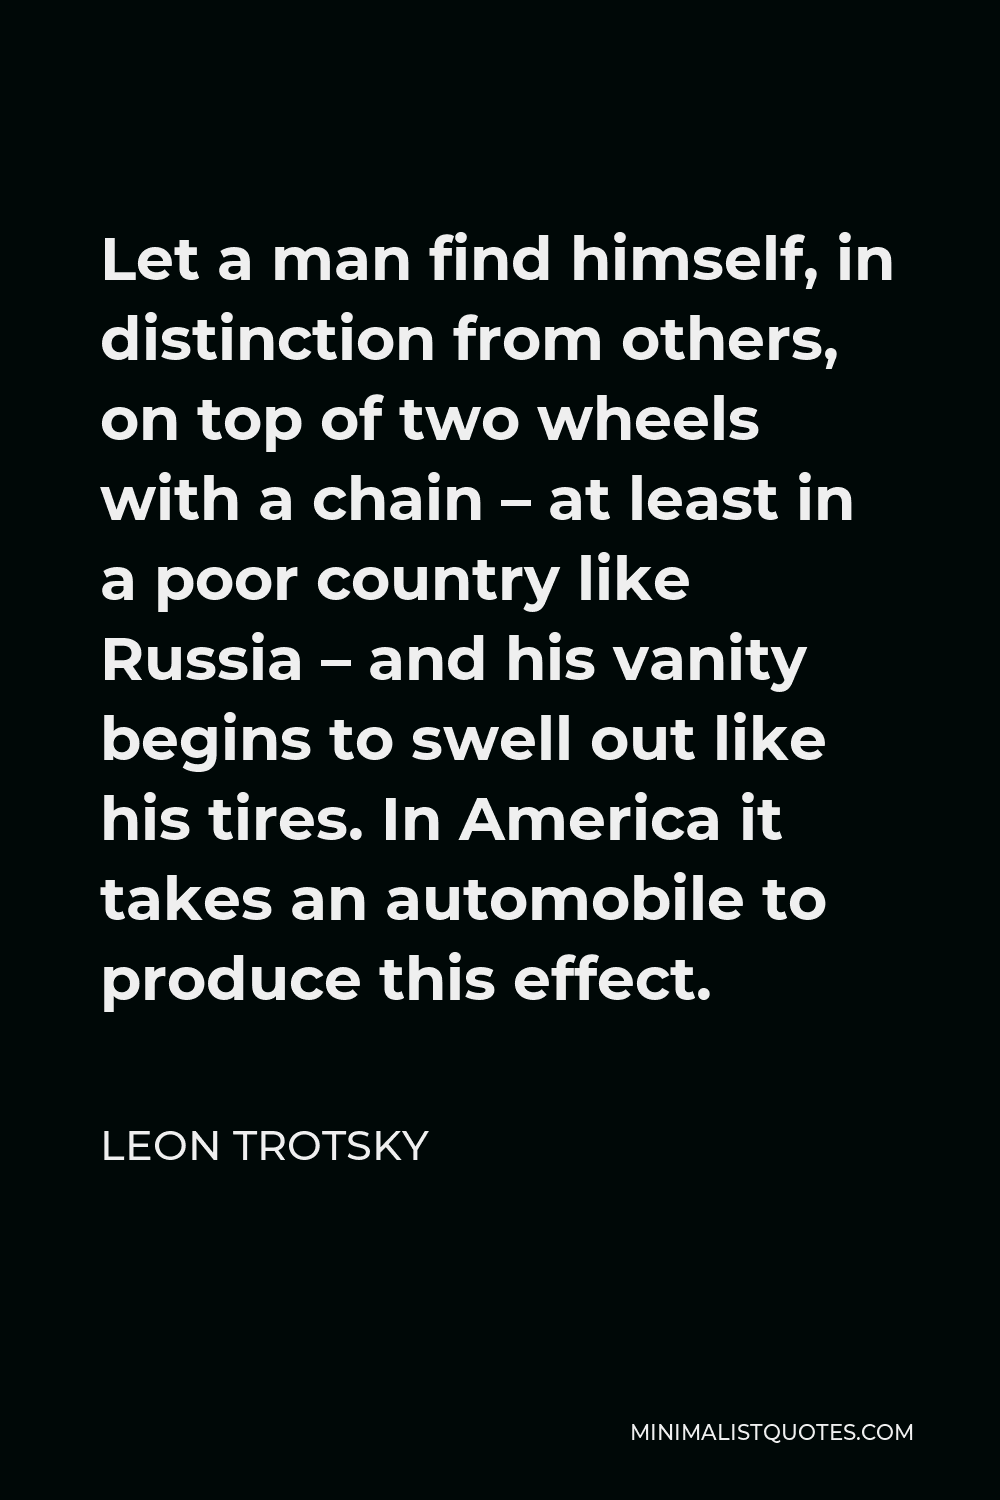 Leon Trotsky Quote - Let a man find himself, in distinction from others, on top of two wheels with a chain – at least in a poor country like Russia – and his vanity begins to swell out like his tires. In America it takes an automobile to produce this effect.